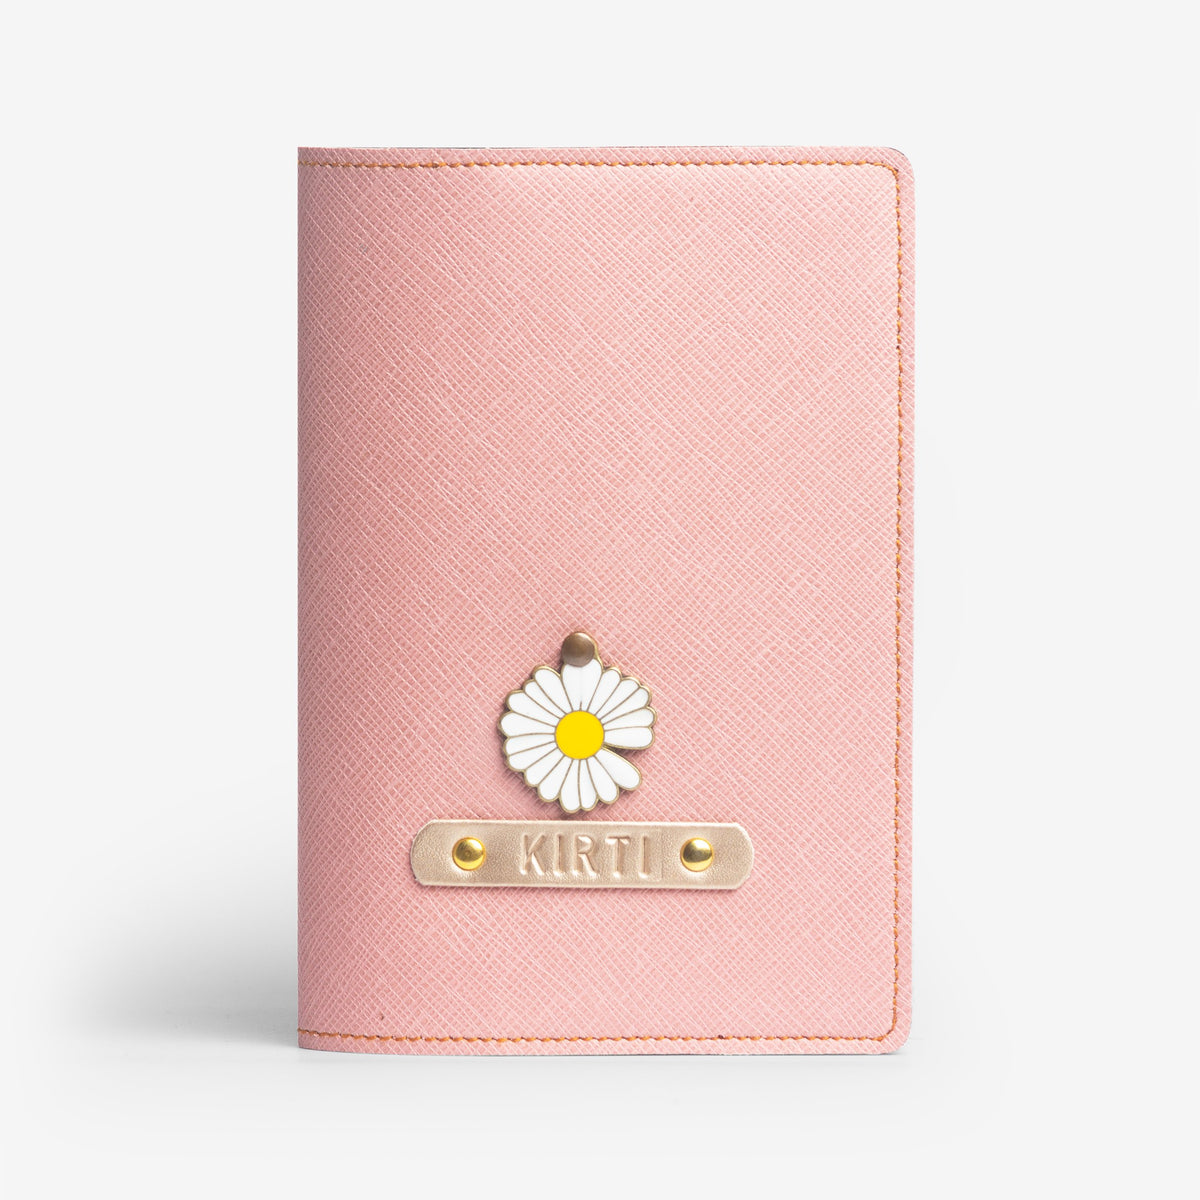 The Messy Corner Passport Cover Personalized Passport Cover - Salmon Pink